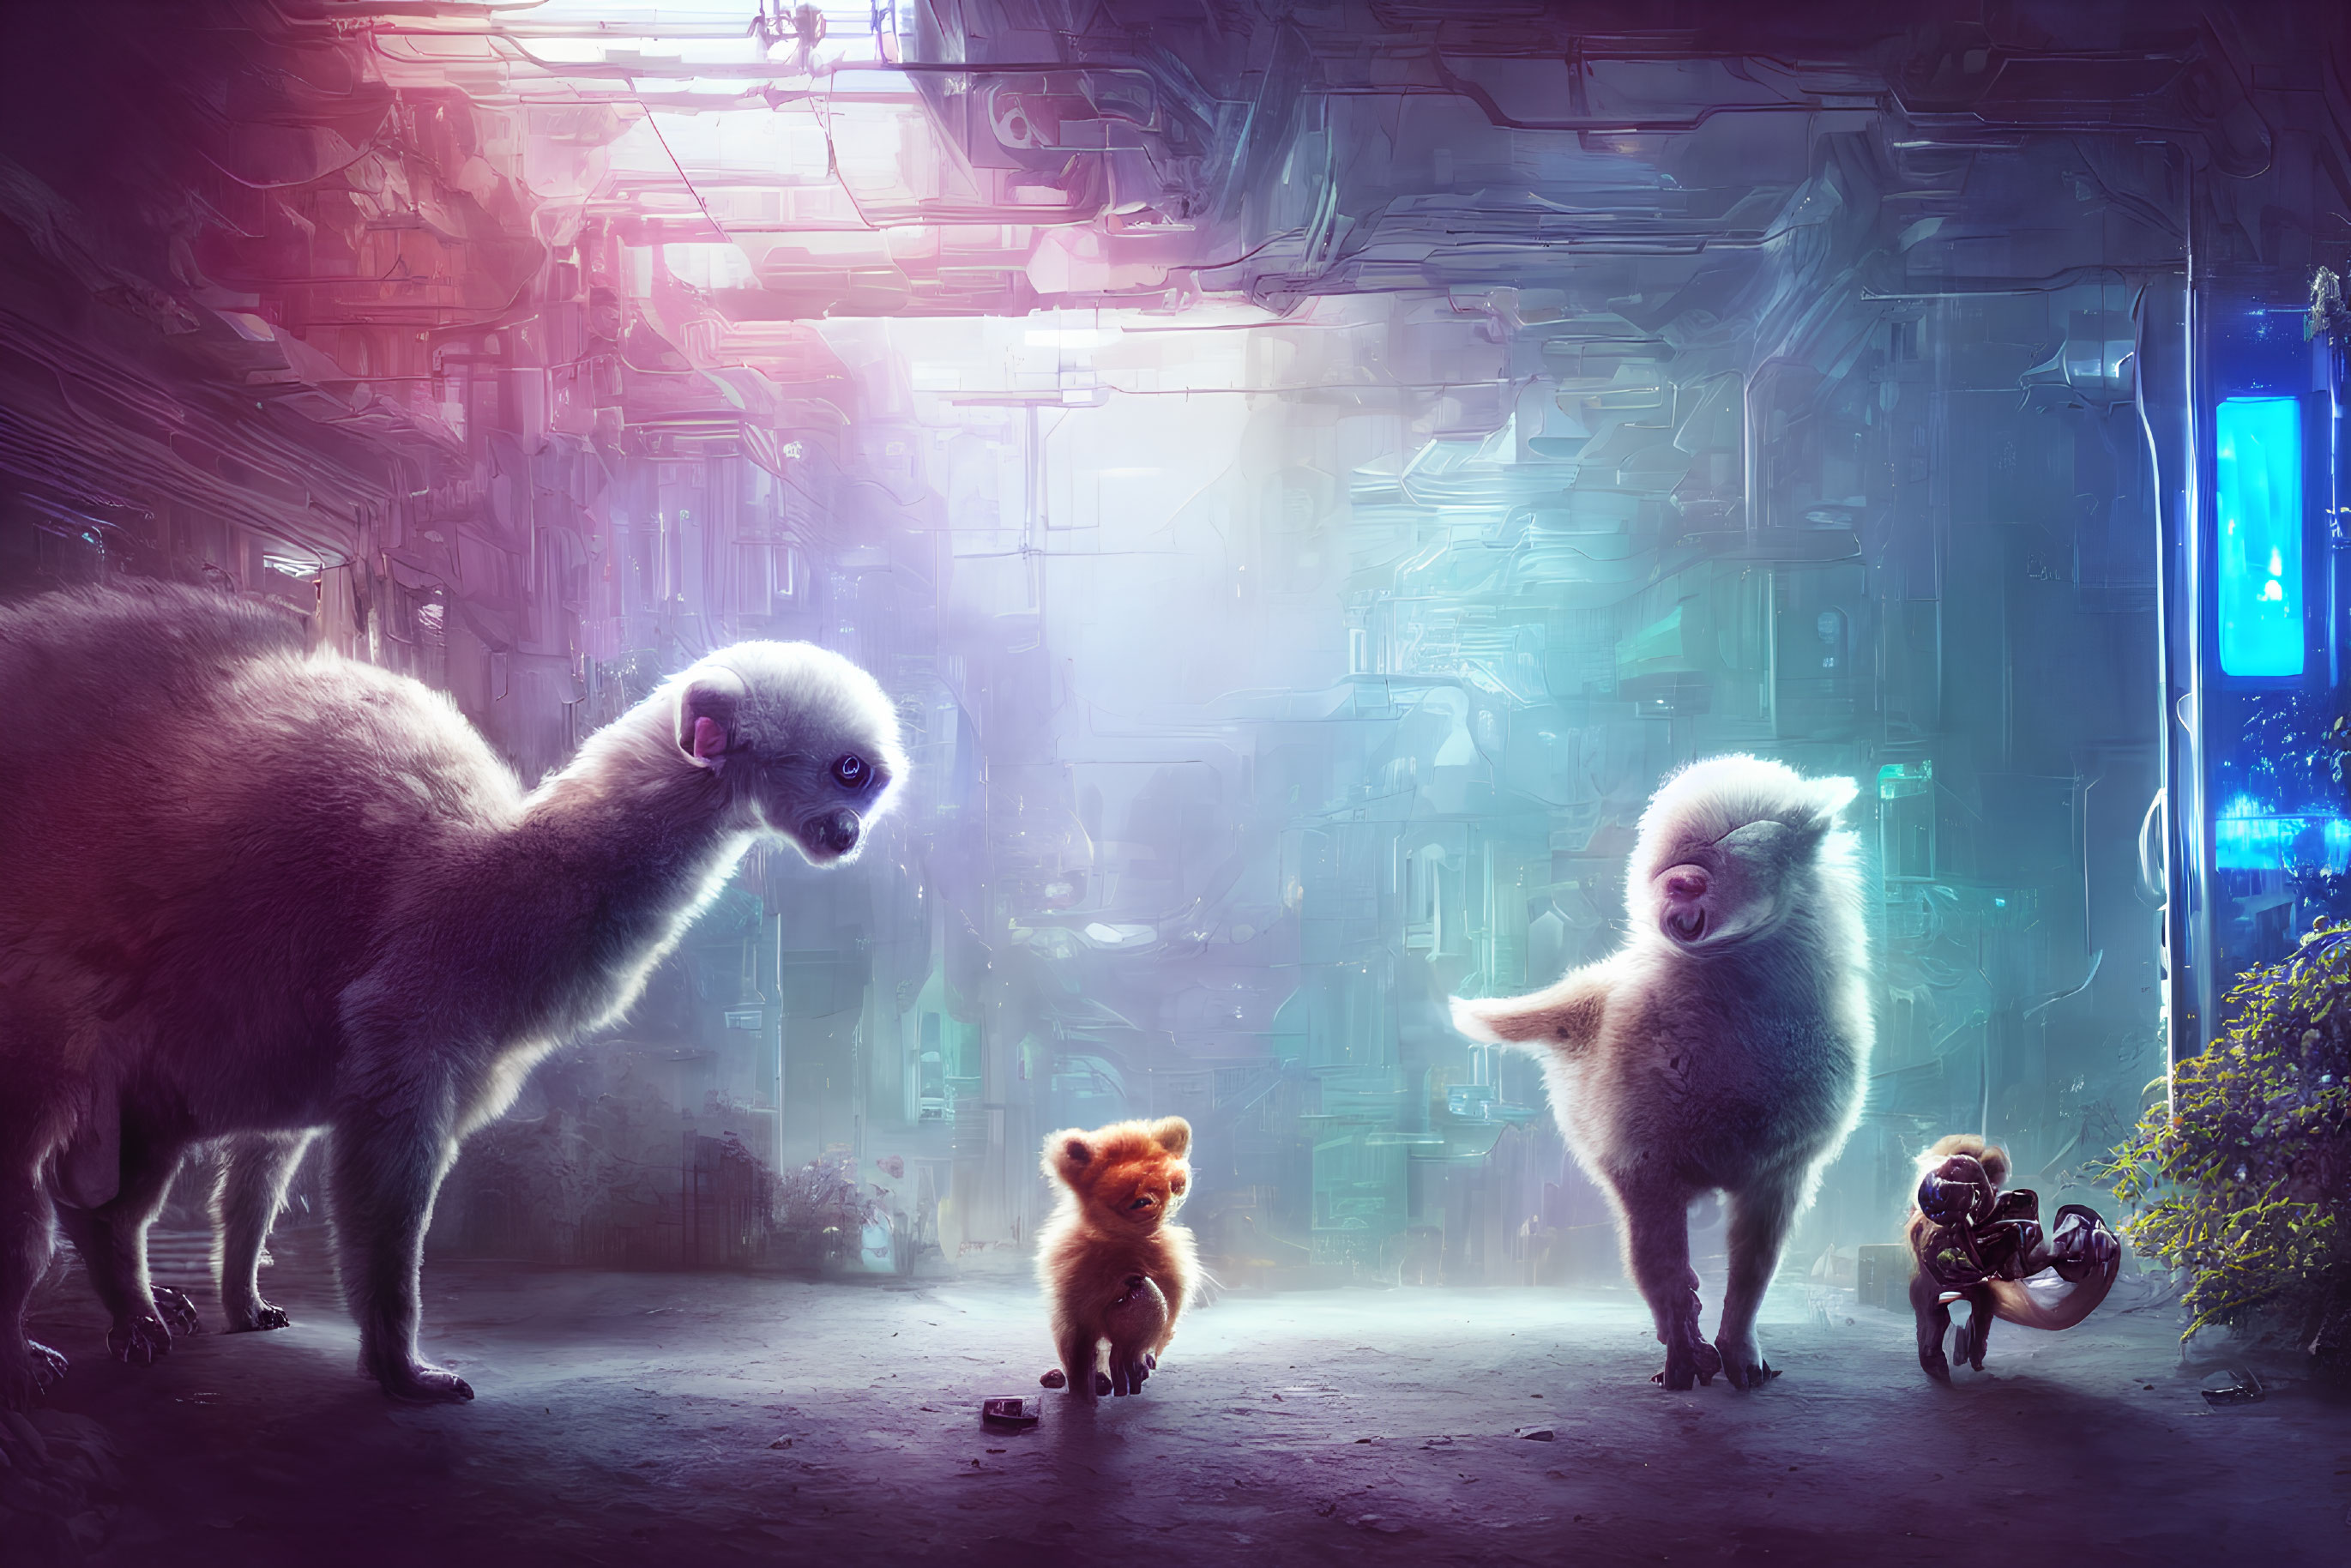 Anthropomorphic animals in neon-lit cityscape with llama-like creatures, bear, and figure.